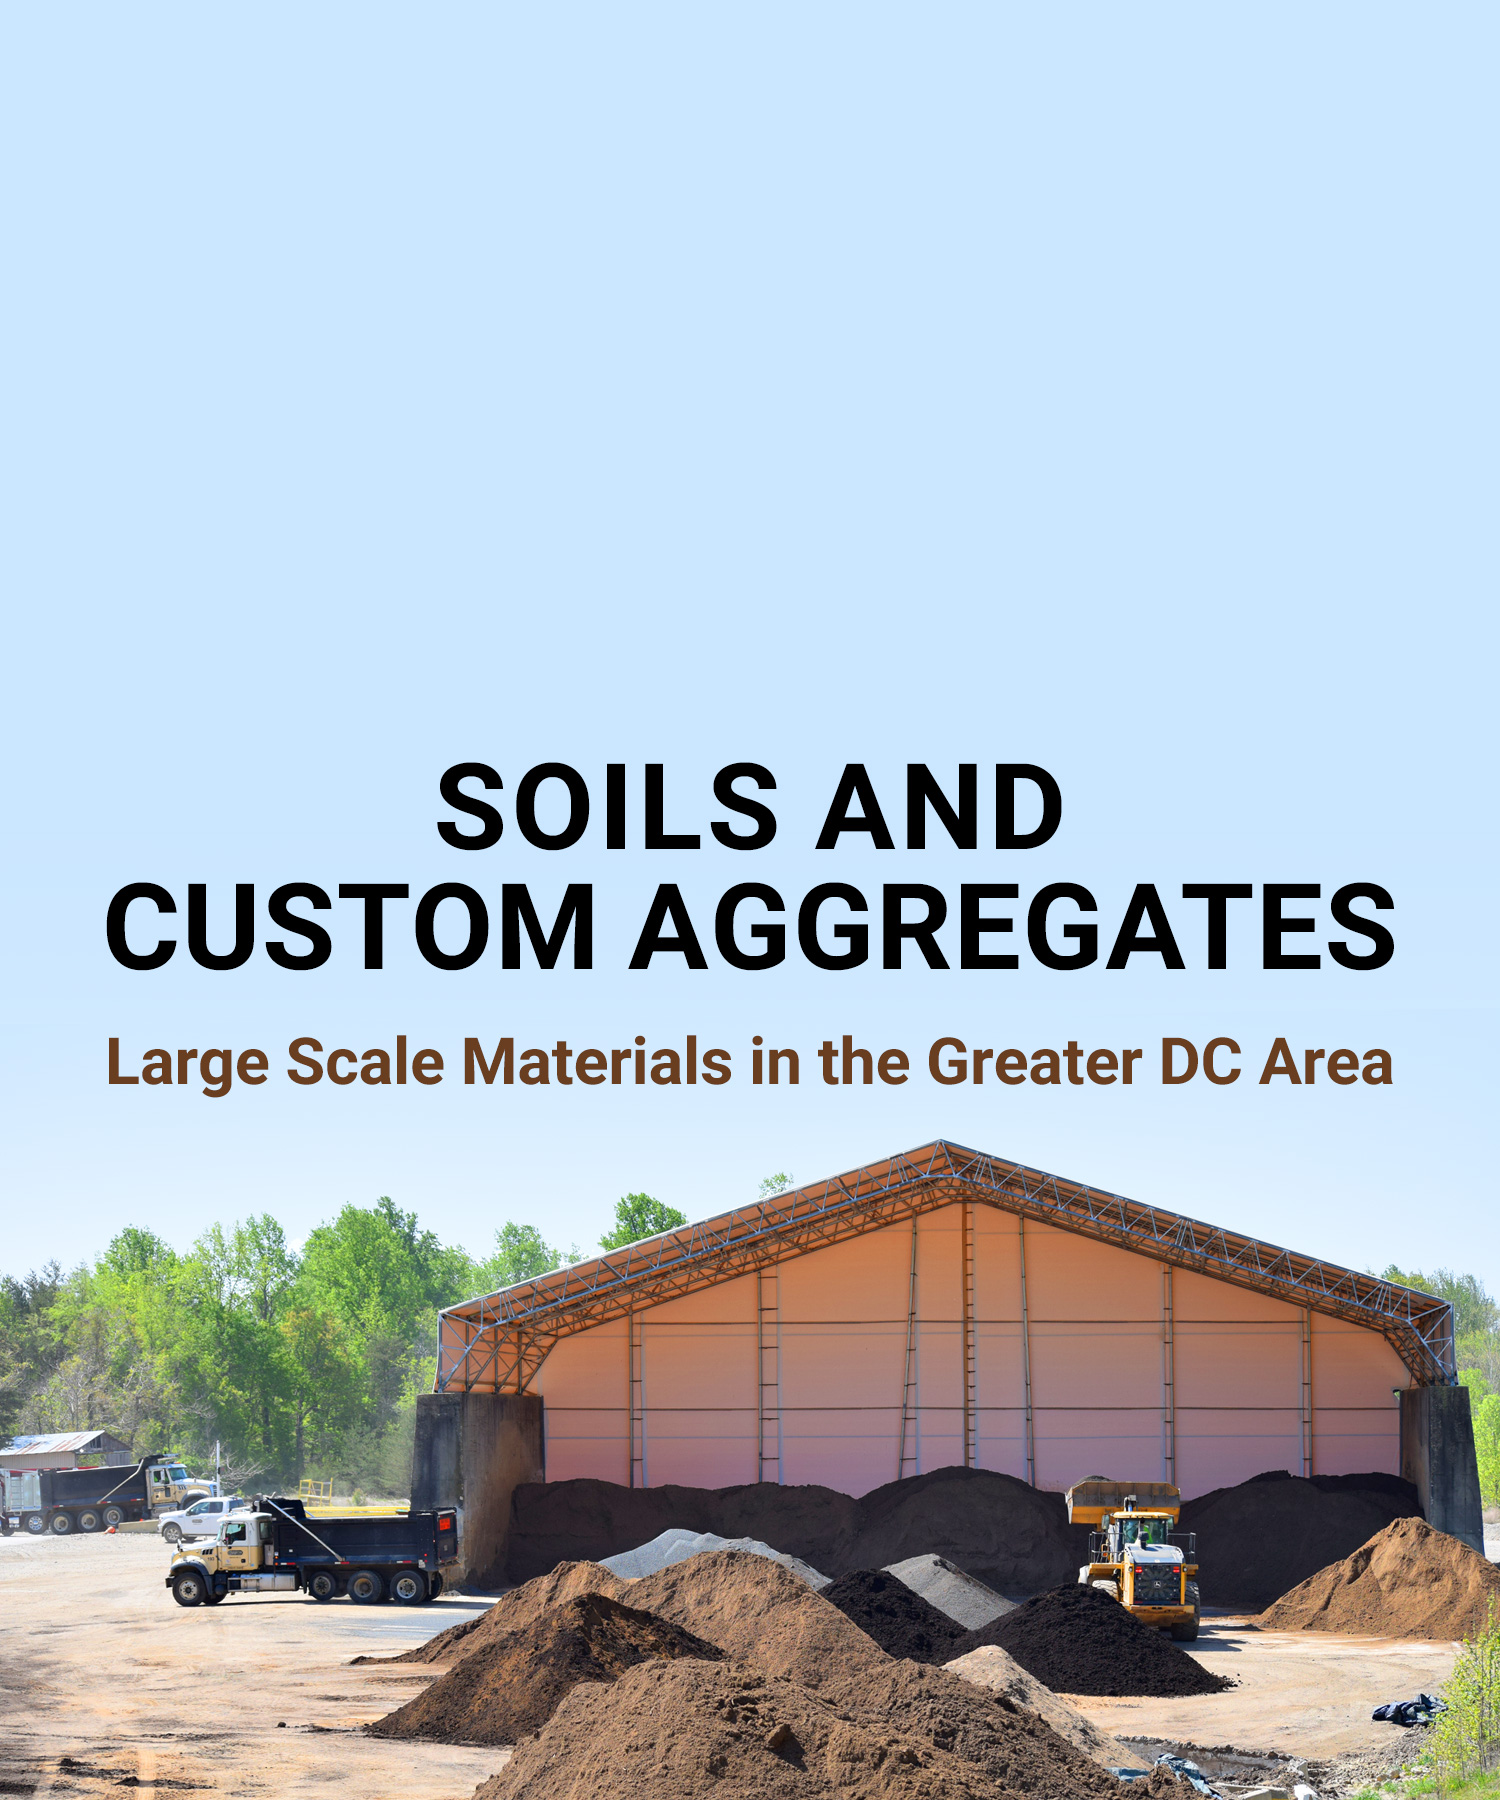 Renard Lakes - Soils and Custom Aggregates on a large scale in the greater DC area